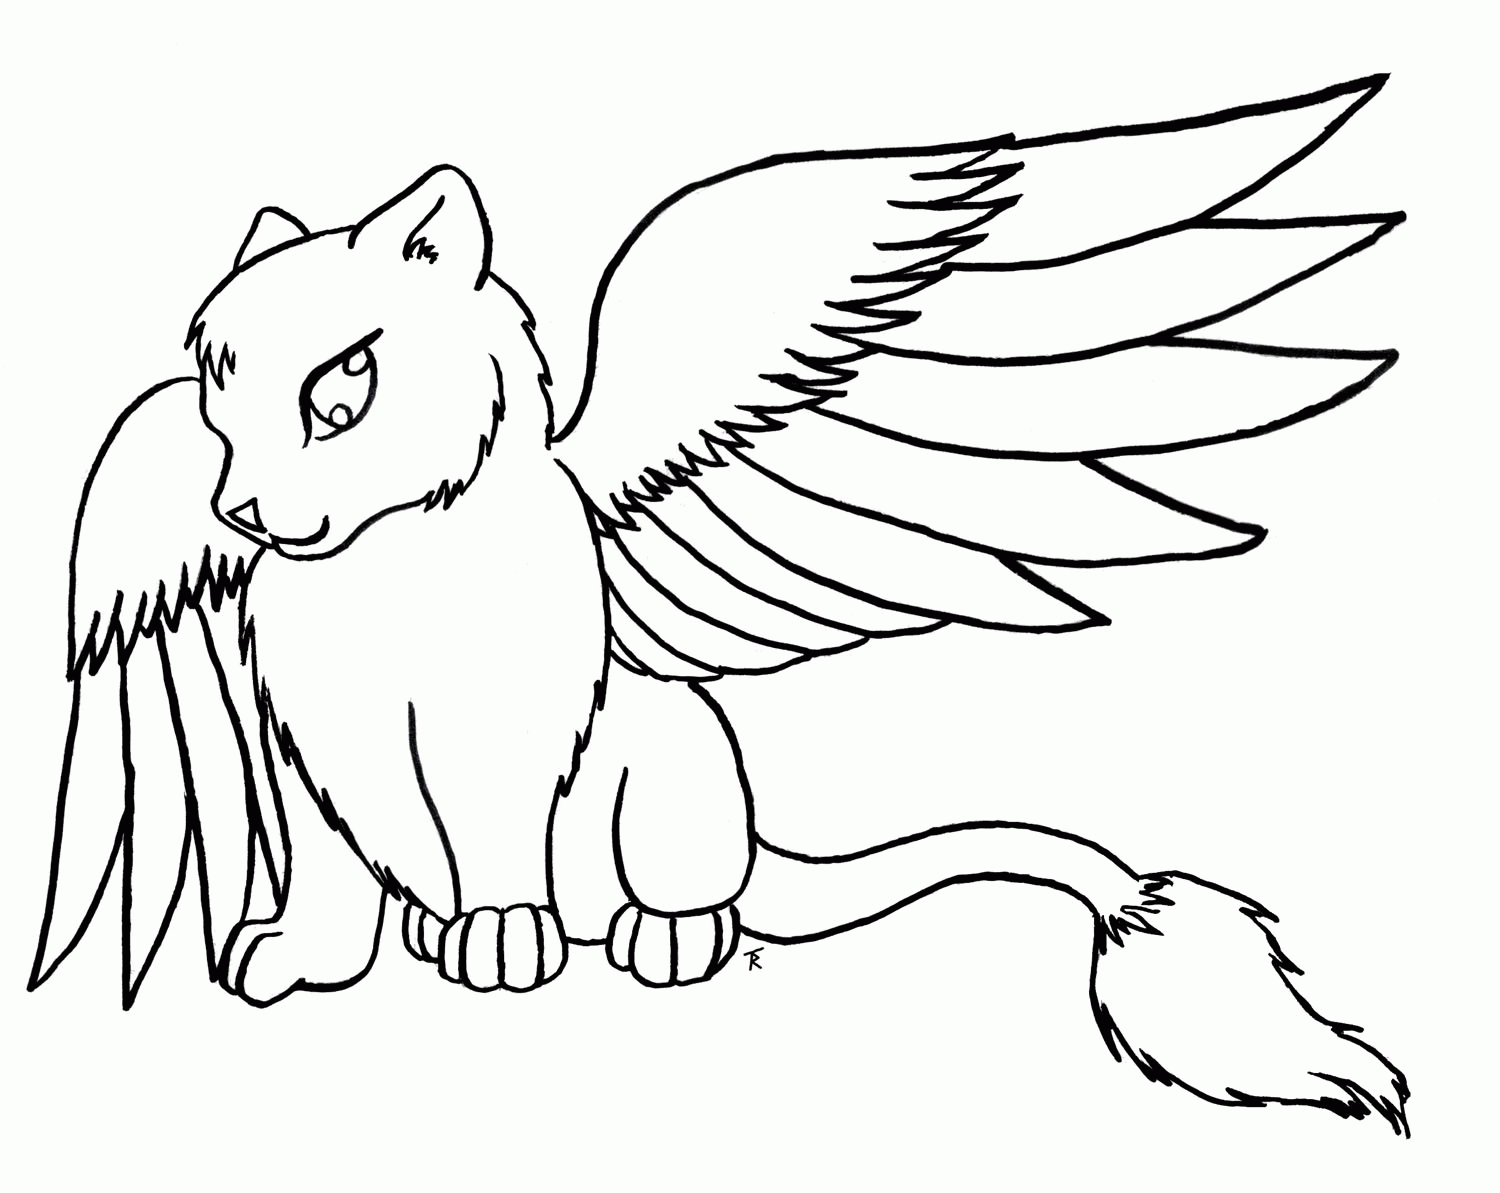 11 Pics Of Cute Winged Wolf Coloring Pages - Wolves ...